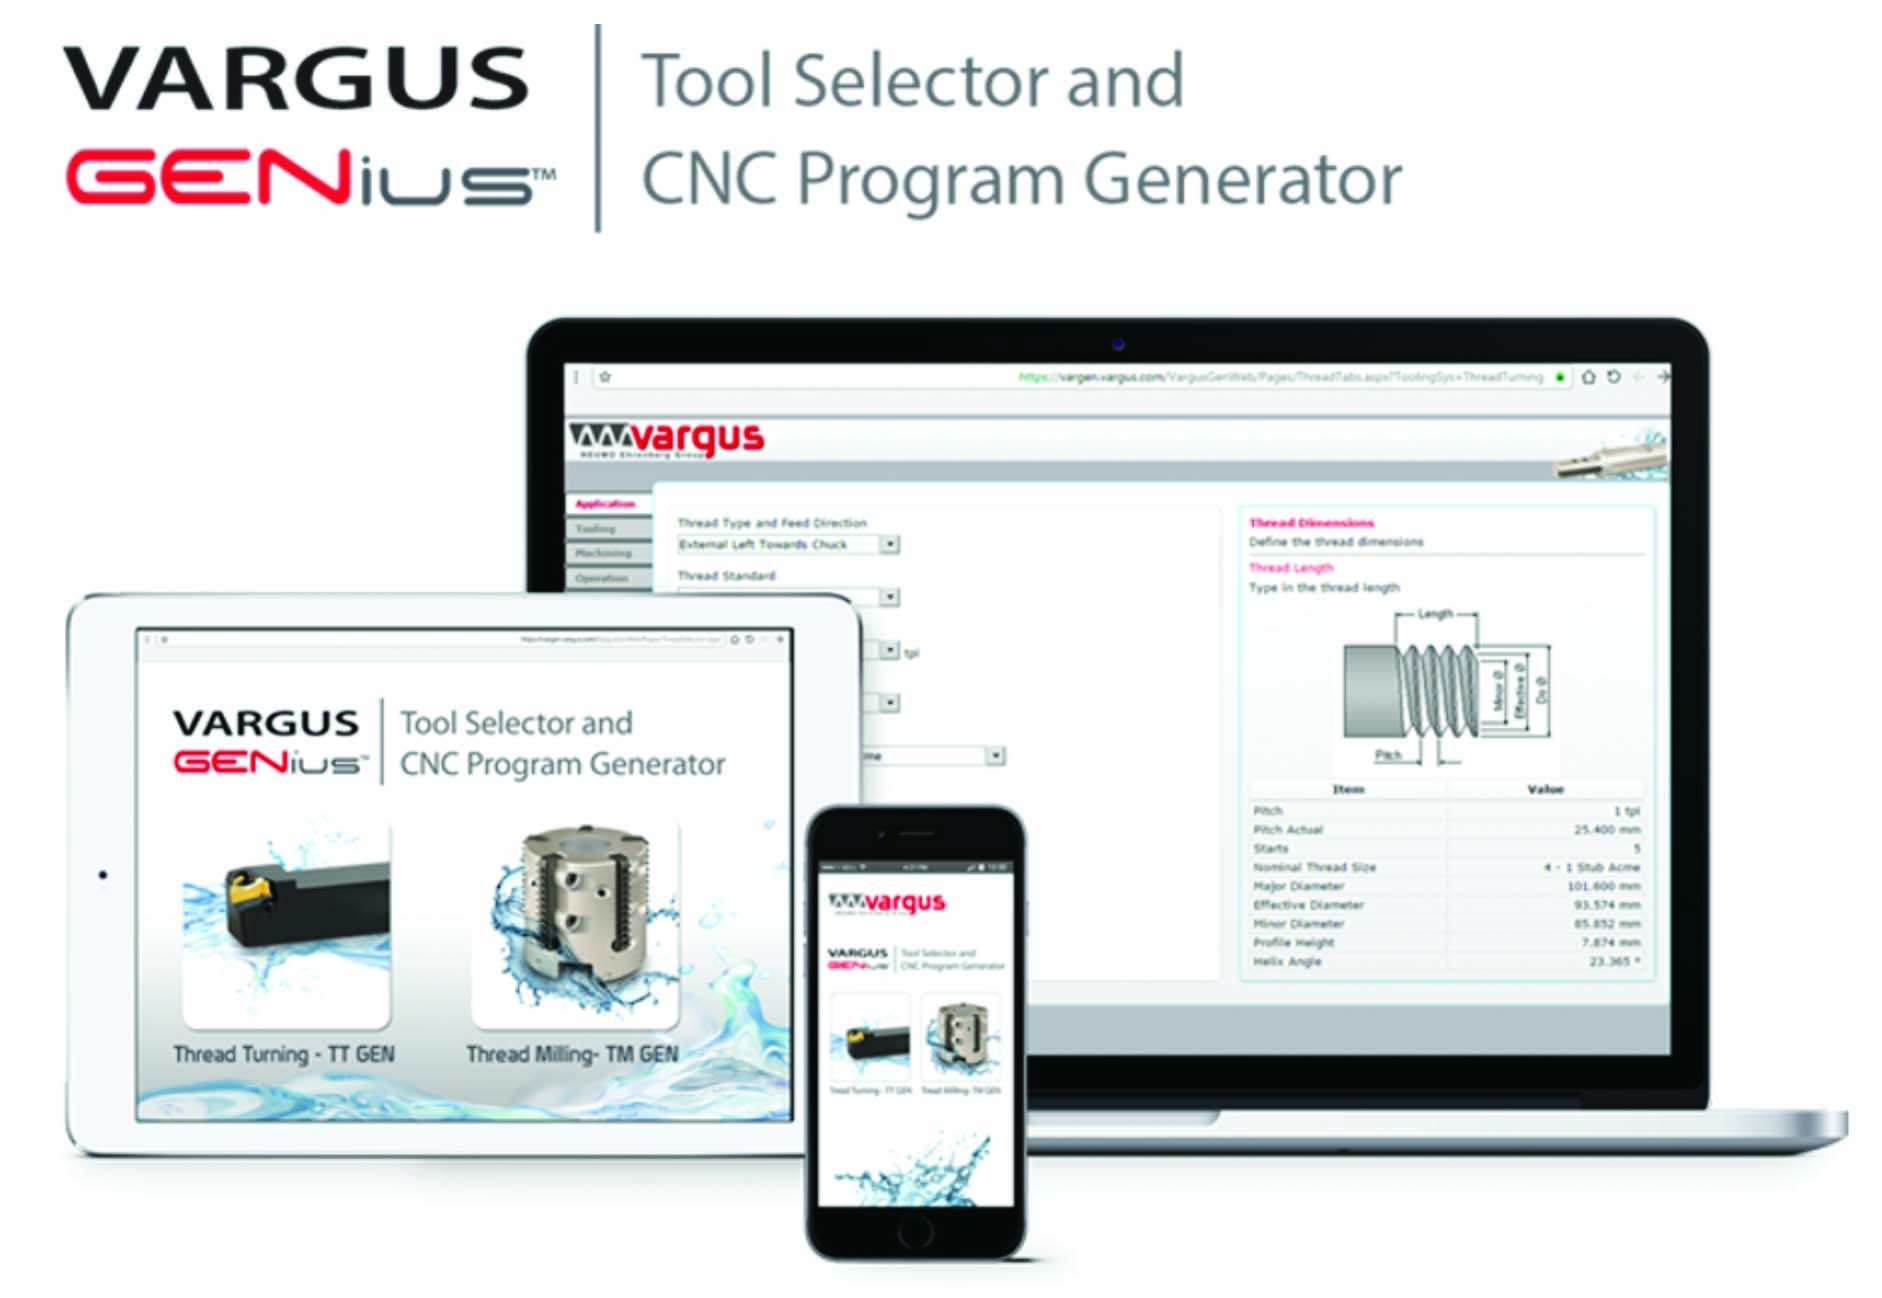 The Vargus GENius app helped improve insert life, eliminated chatter and decreased cycle time, when producing external threads in 316L stainless steel parts.